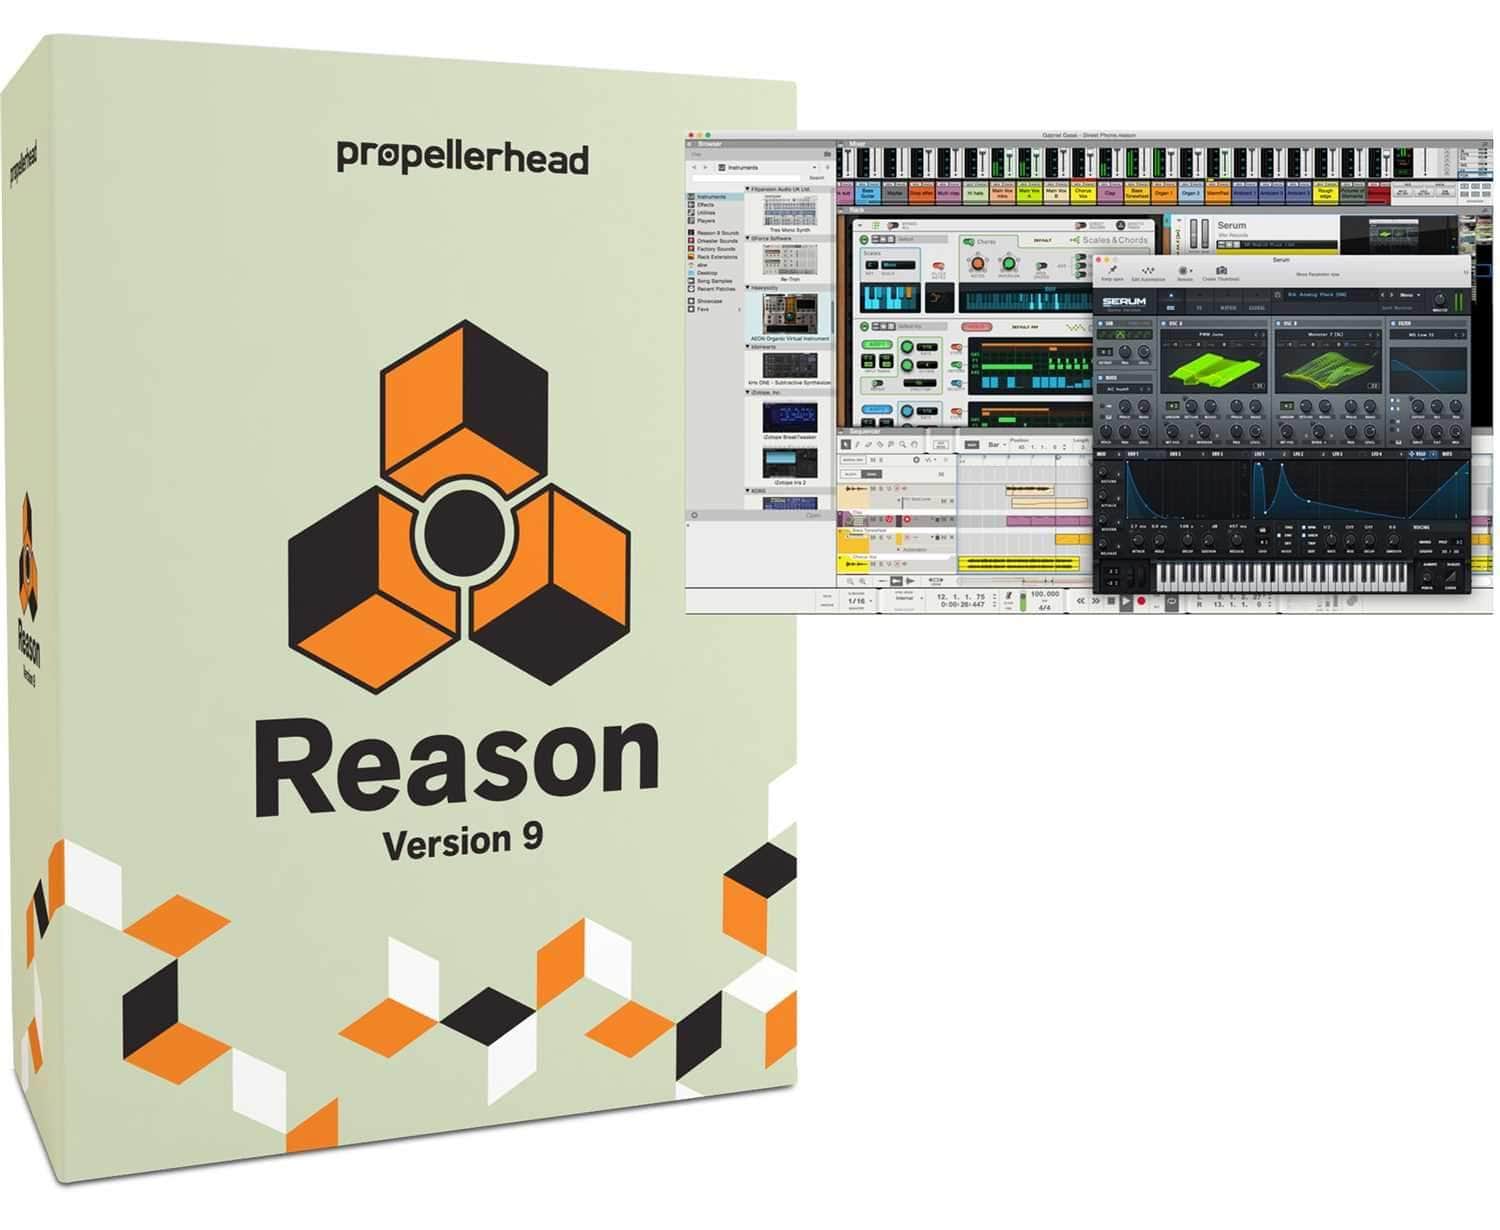 propellerhead reason 7 control surface not detected